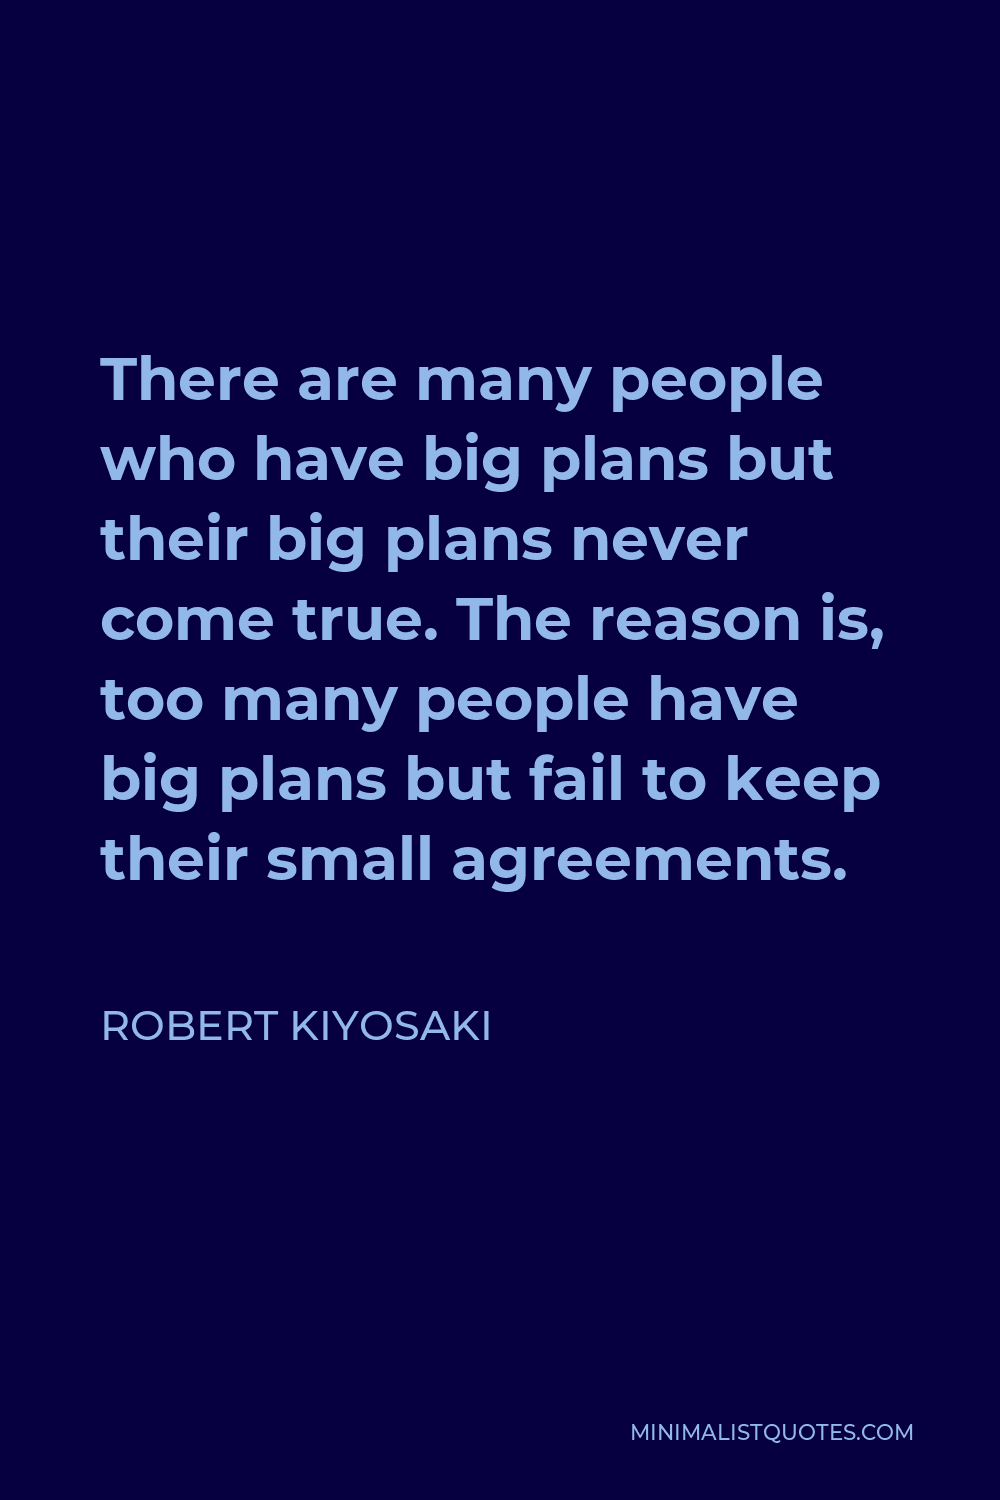 Robert Kiyosaki Quote - There are many people who have big plans but their big plans never come true. The reason is, too many people have big plans but fail to keep their small agreements.